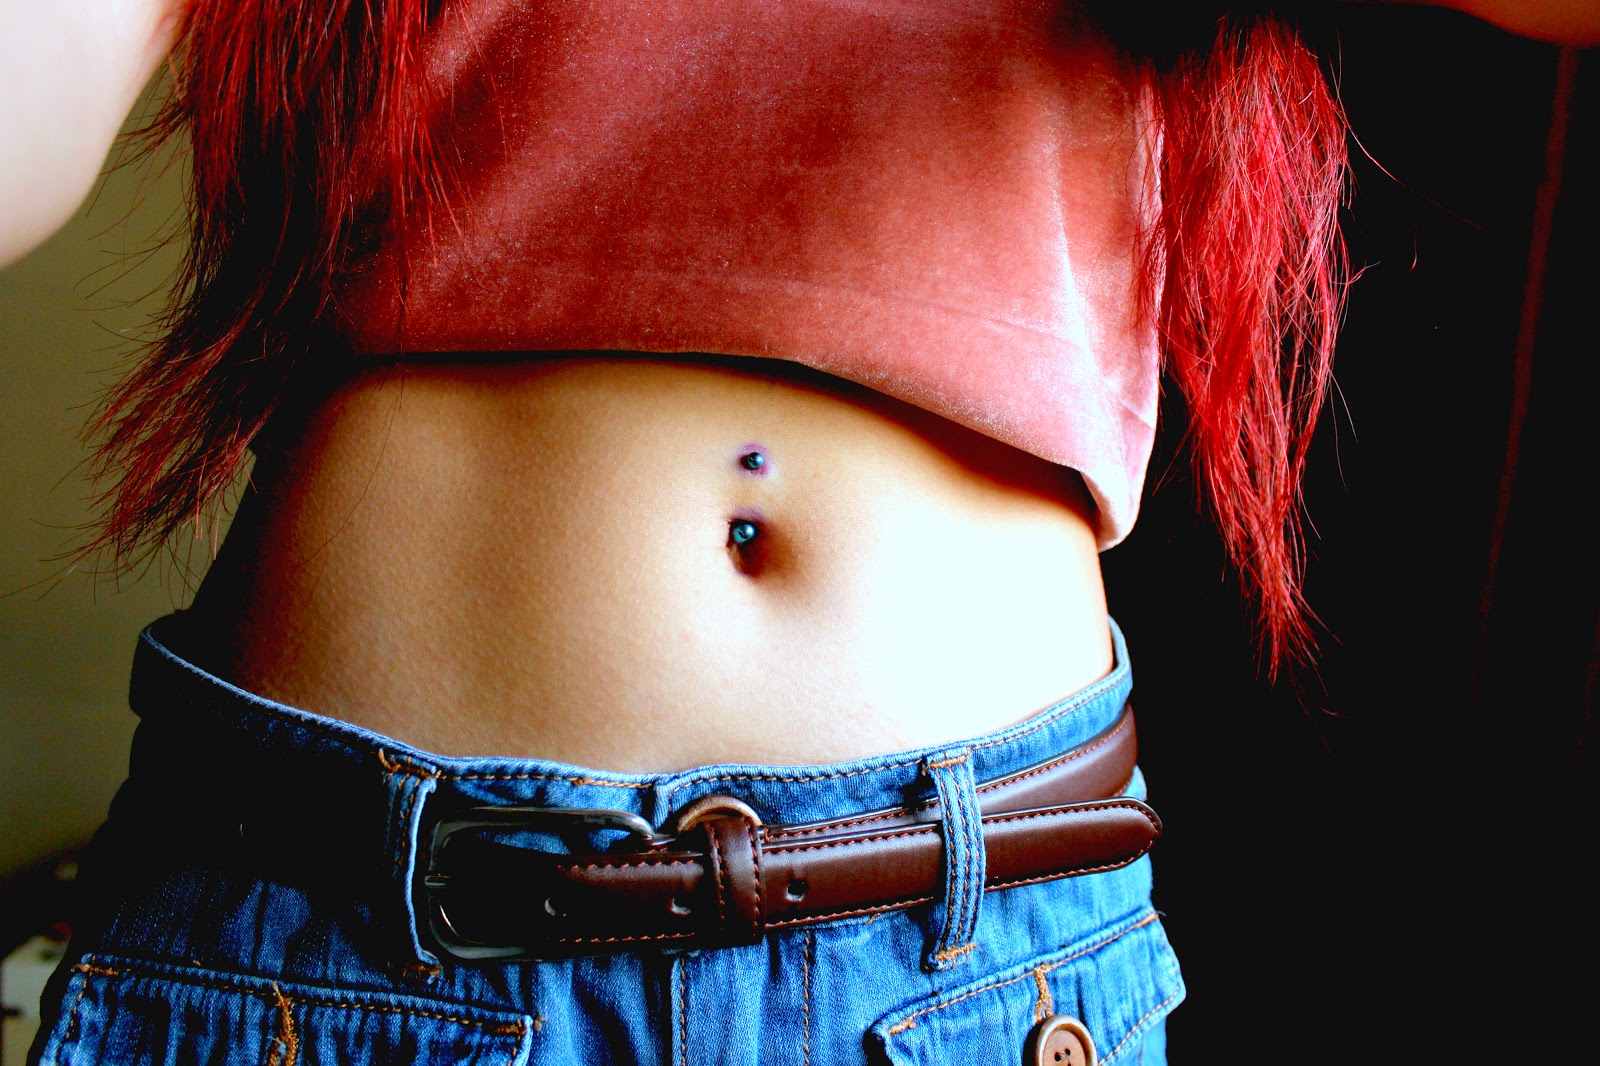 Hello = had my belly button pierced about 4 months ago and everything has g...